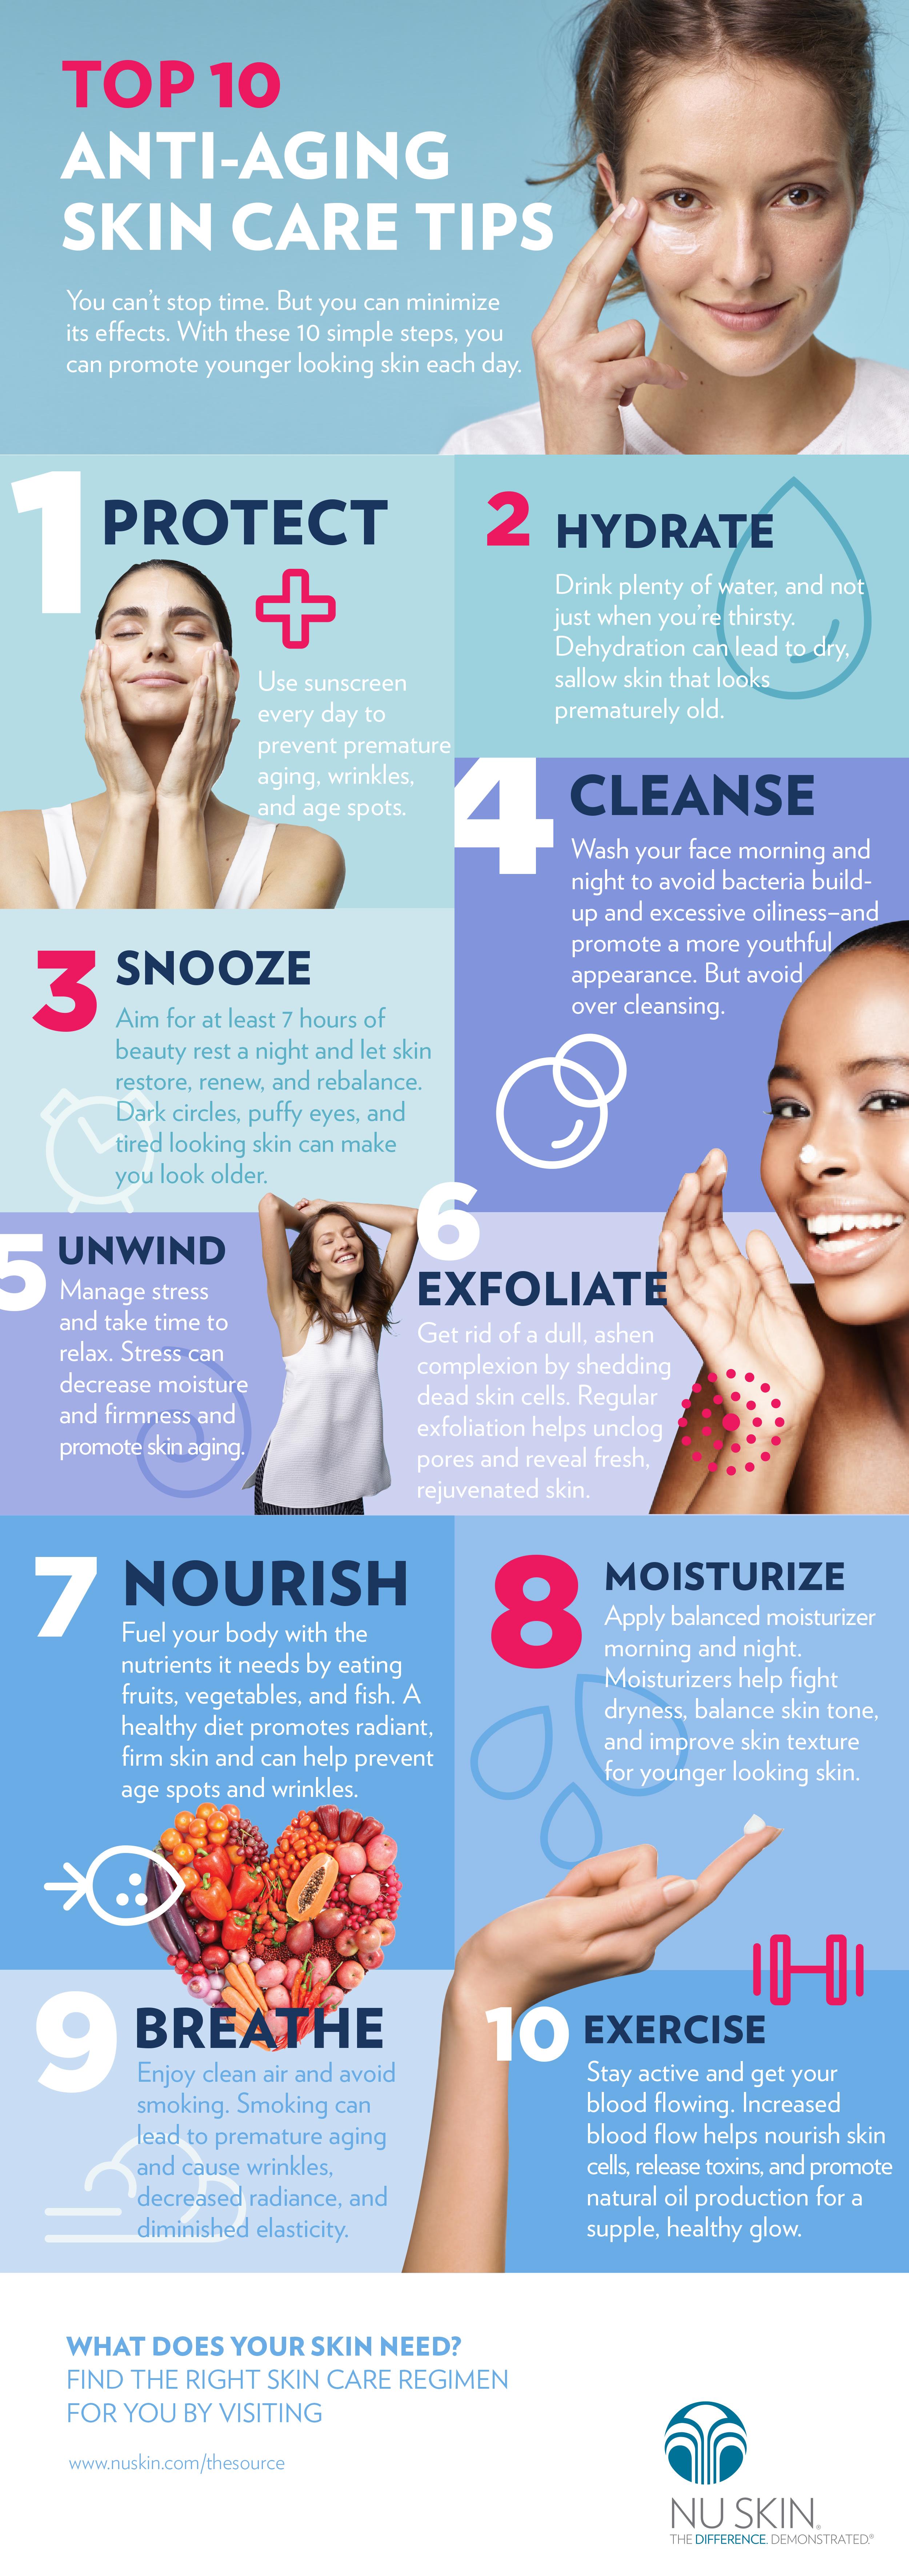 Skincare Tips for Every Age: Taking Care of Your Skin Through the Years